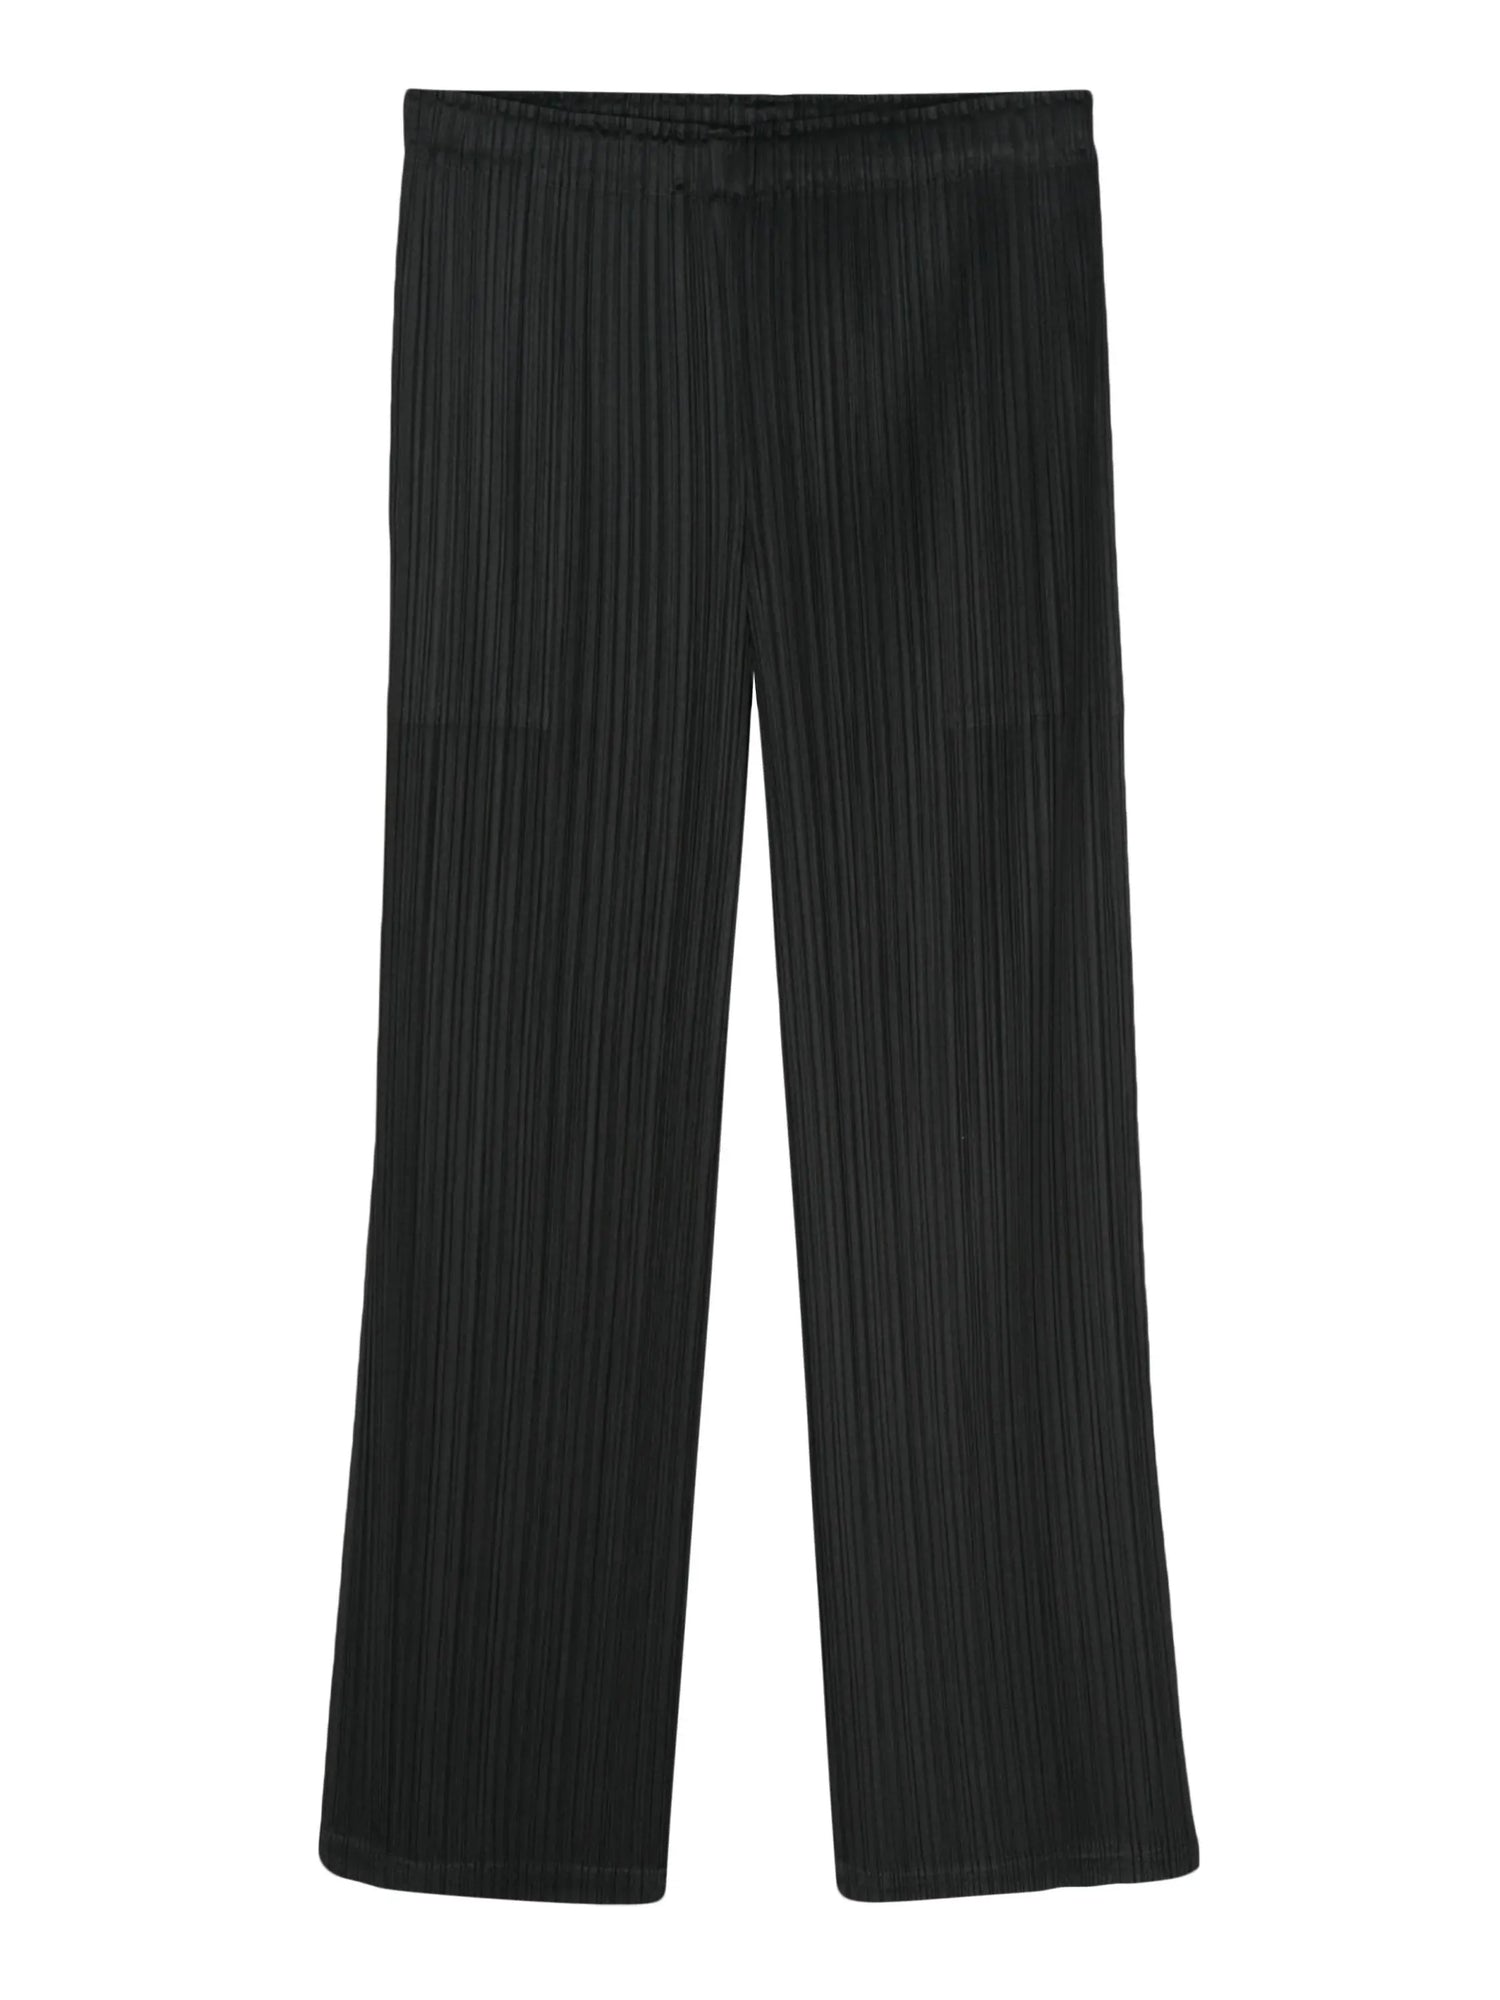 Pleated full-lenght trousers, black (carryover)